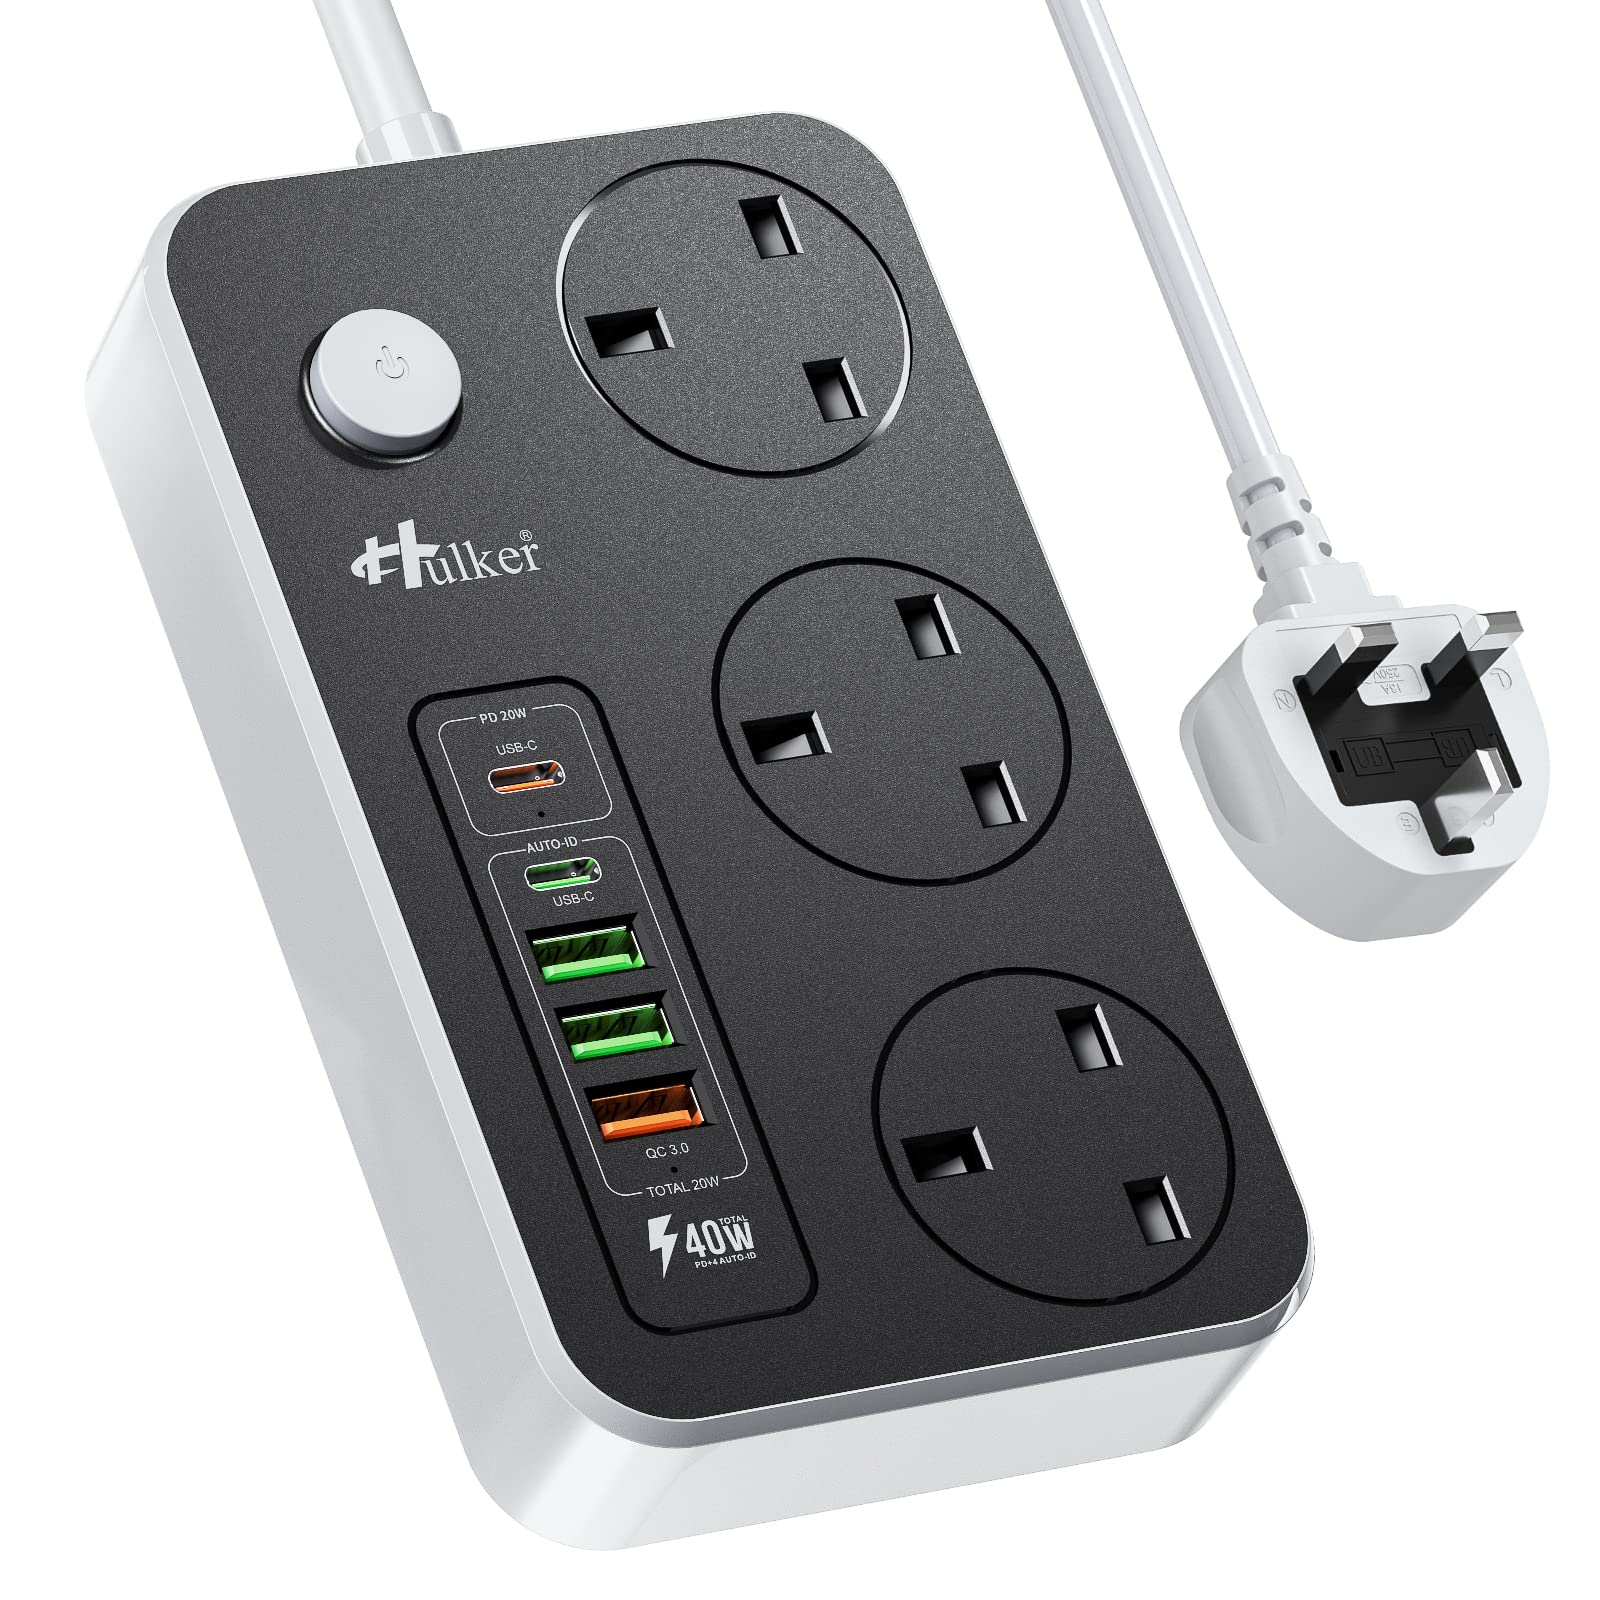 Hulker Extension Lead with USB C Ports Power Strip with 3 Way Outlets 5 USB Slots (1 PD 20W Type-C, 1 QC 18W Fast USB, 3 USB-A Port), Multi Plug Extension Socket with 2 Meter Power Cord 3250W 13A